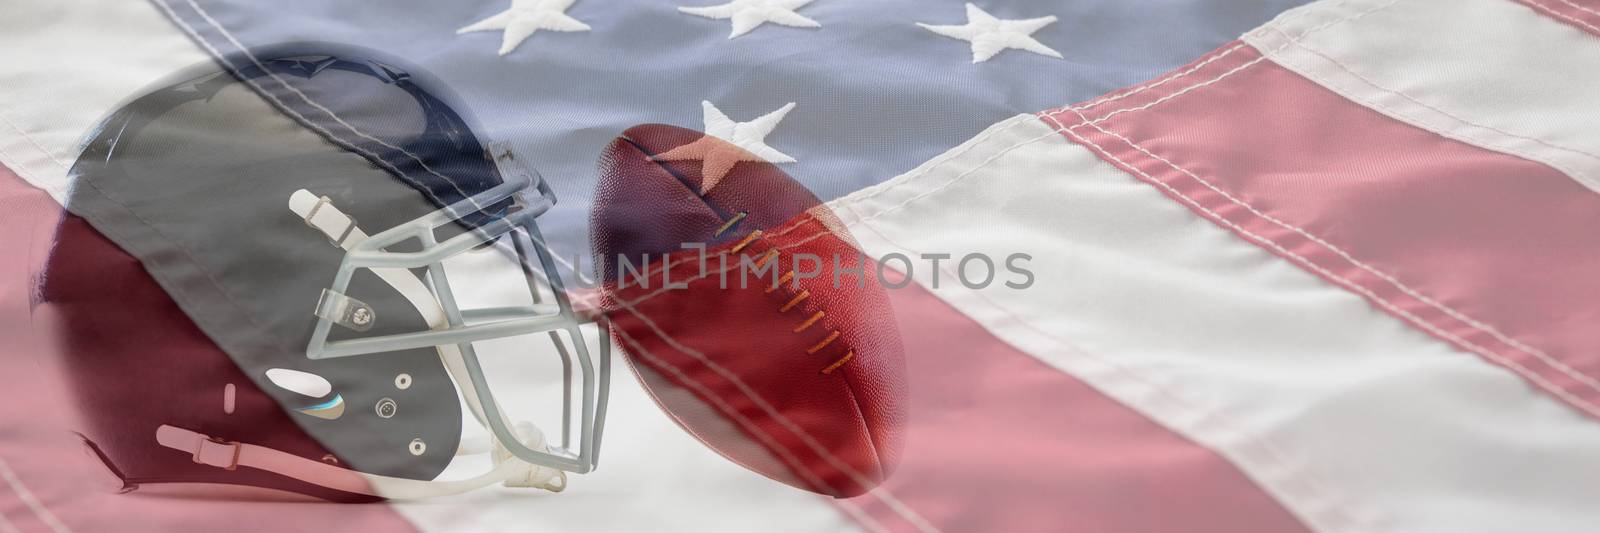 Composite image of close-up of american football and helmet by Wavebreakmedia